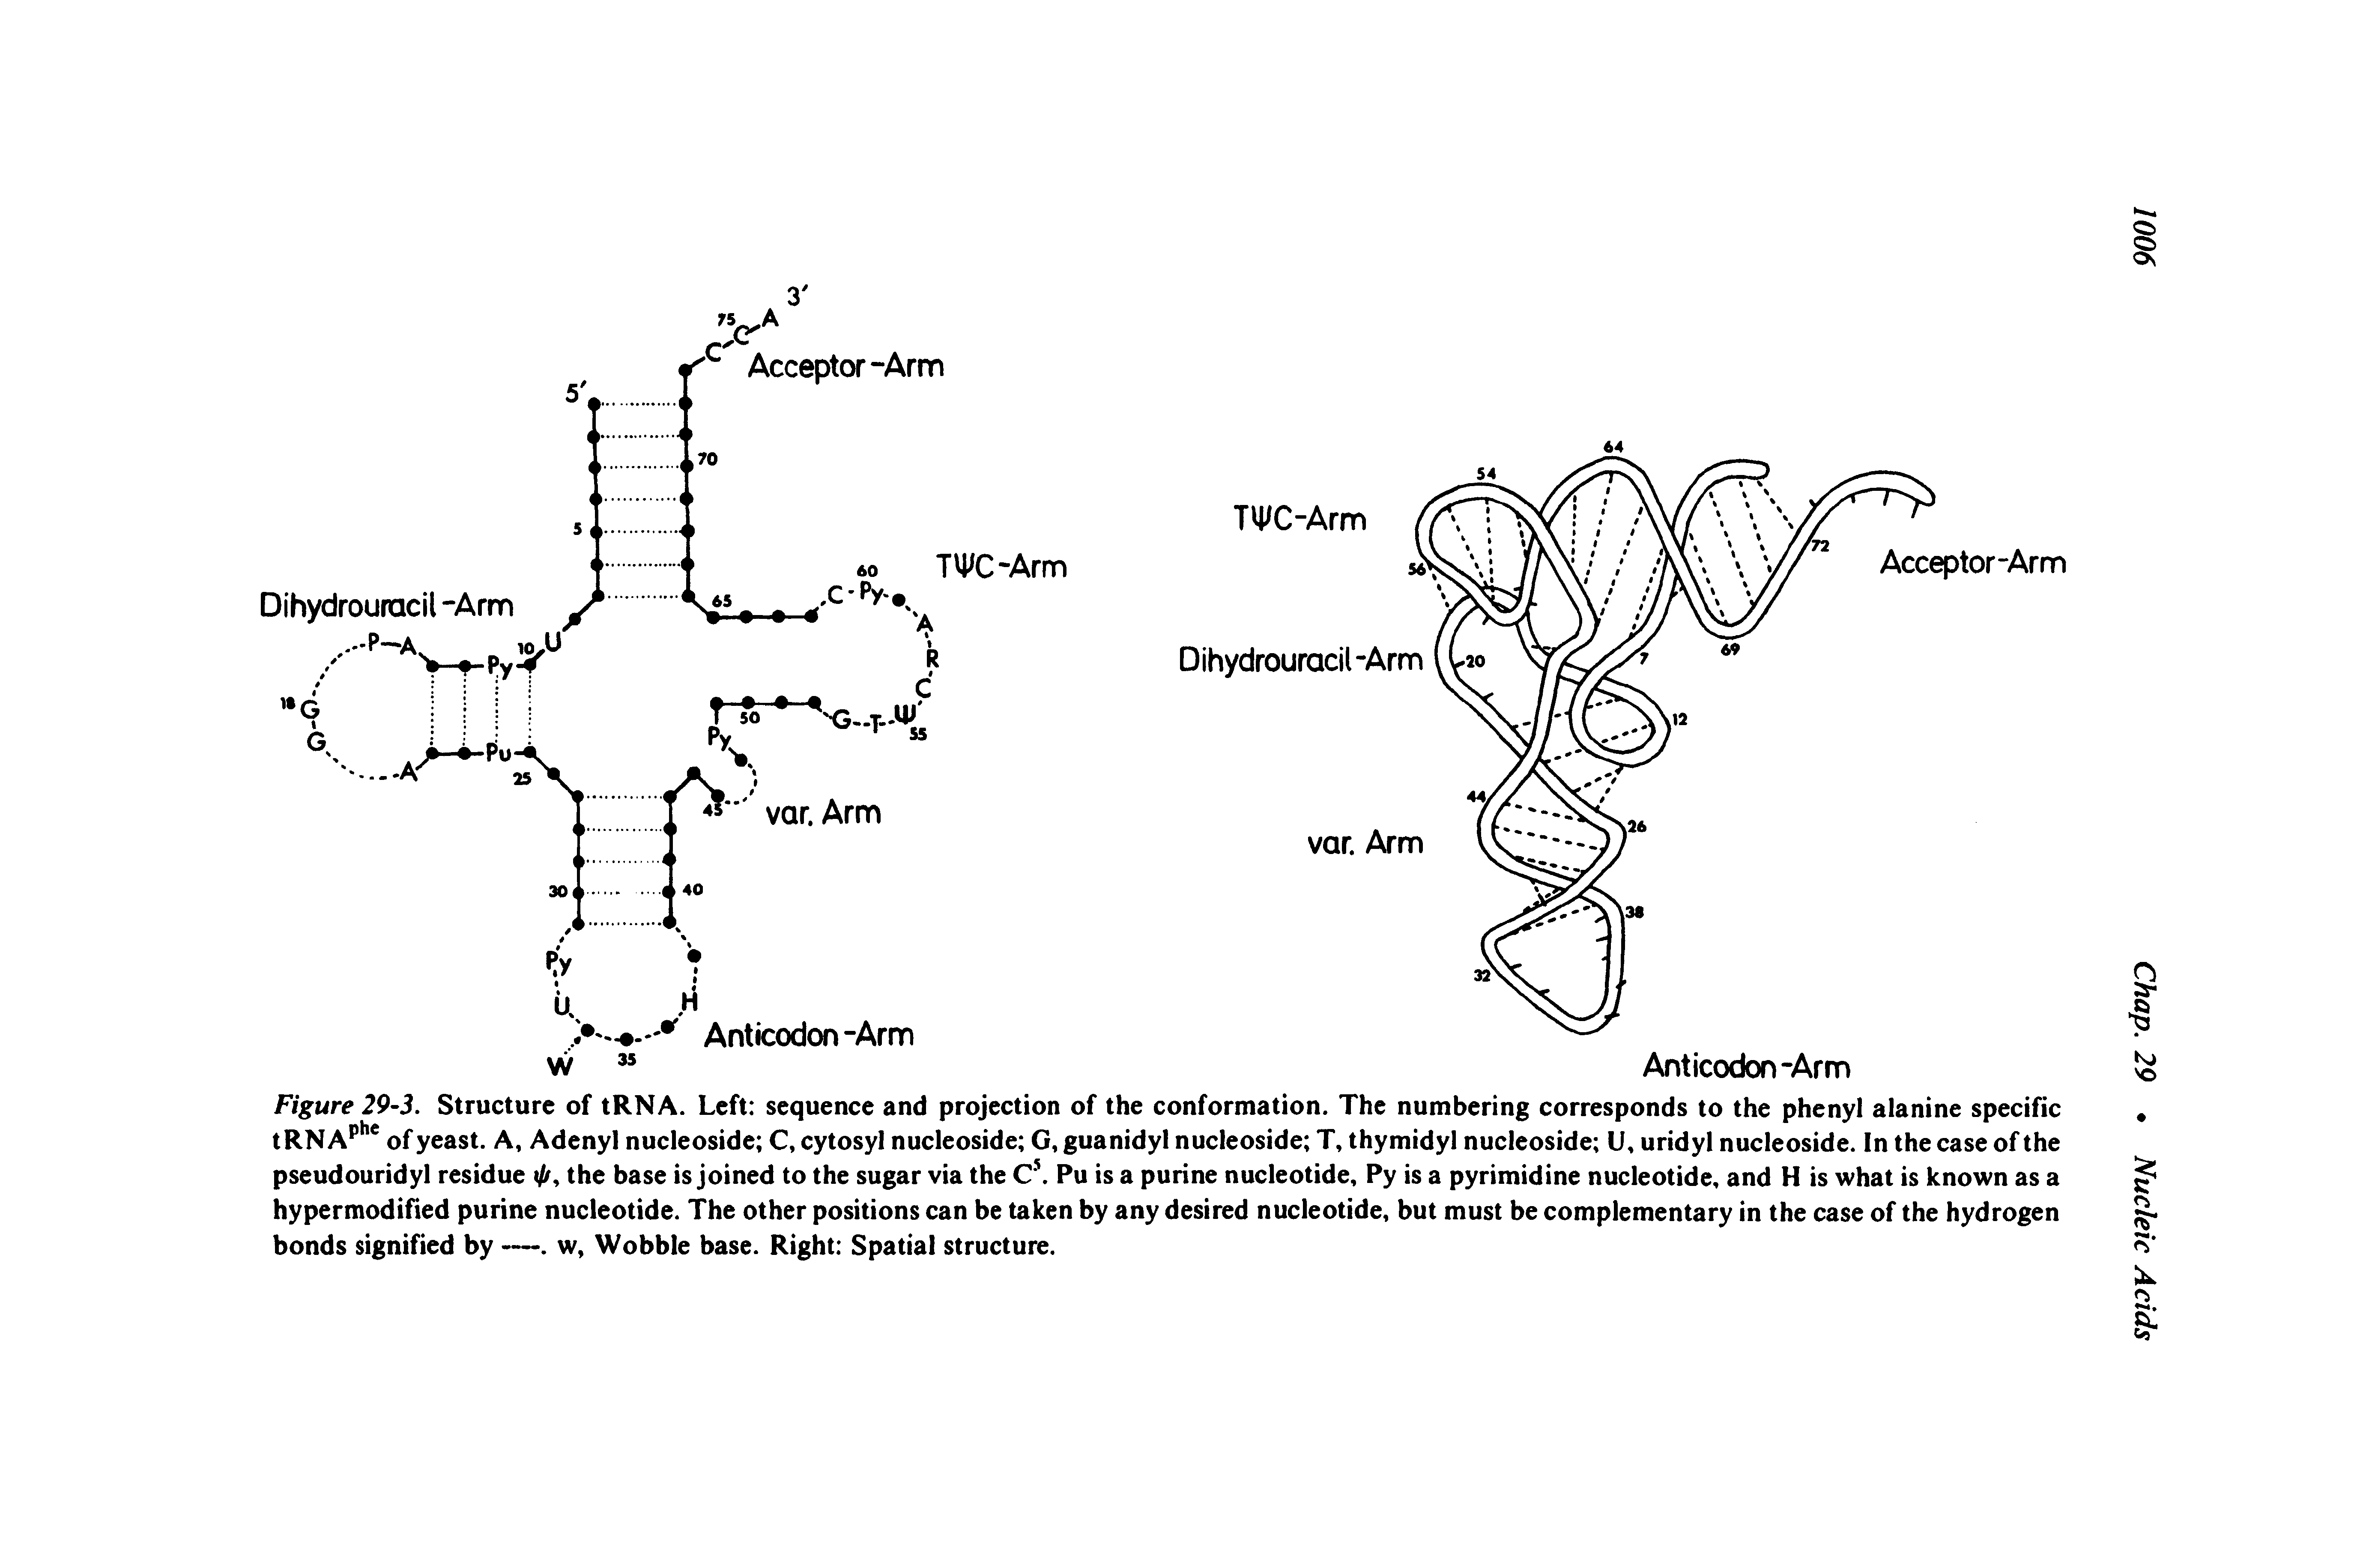 Figure 29-3. Structure of tRNA. Left sequence and projection of the conformation. The numbering corresponds to the phenyl alanine specific tRN A of yeast. A, Adenyl nucleoside C, cytosyl nucleoside G, guanidyl nucleoside T, thymidyl nucleoside U, uridyl nucleoside. In the case of the pseudouridyl residue the base is joined to the sugar via the C Pu is a purine nucleotide, Py is a pyrimidine nucleotide, and H is what is known as a hypermodified purine nucleotide. The other positions can be taken by any desired nucleotide, but must be complementary in the case of the hydrogen bonds signified by —. w, Wobble base. Right Spatial structure.